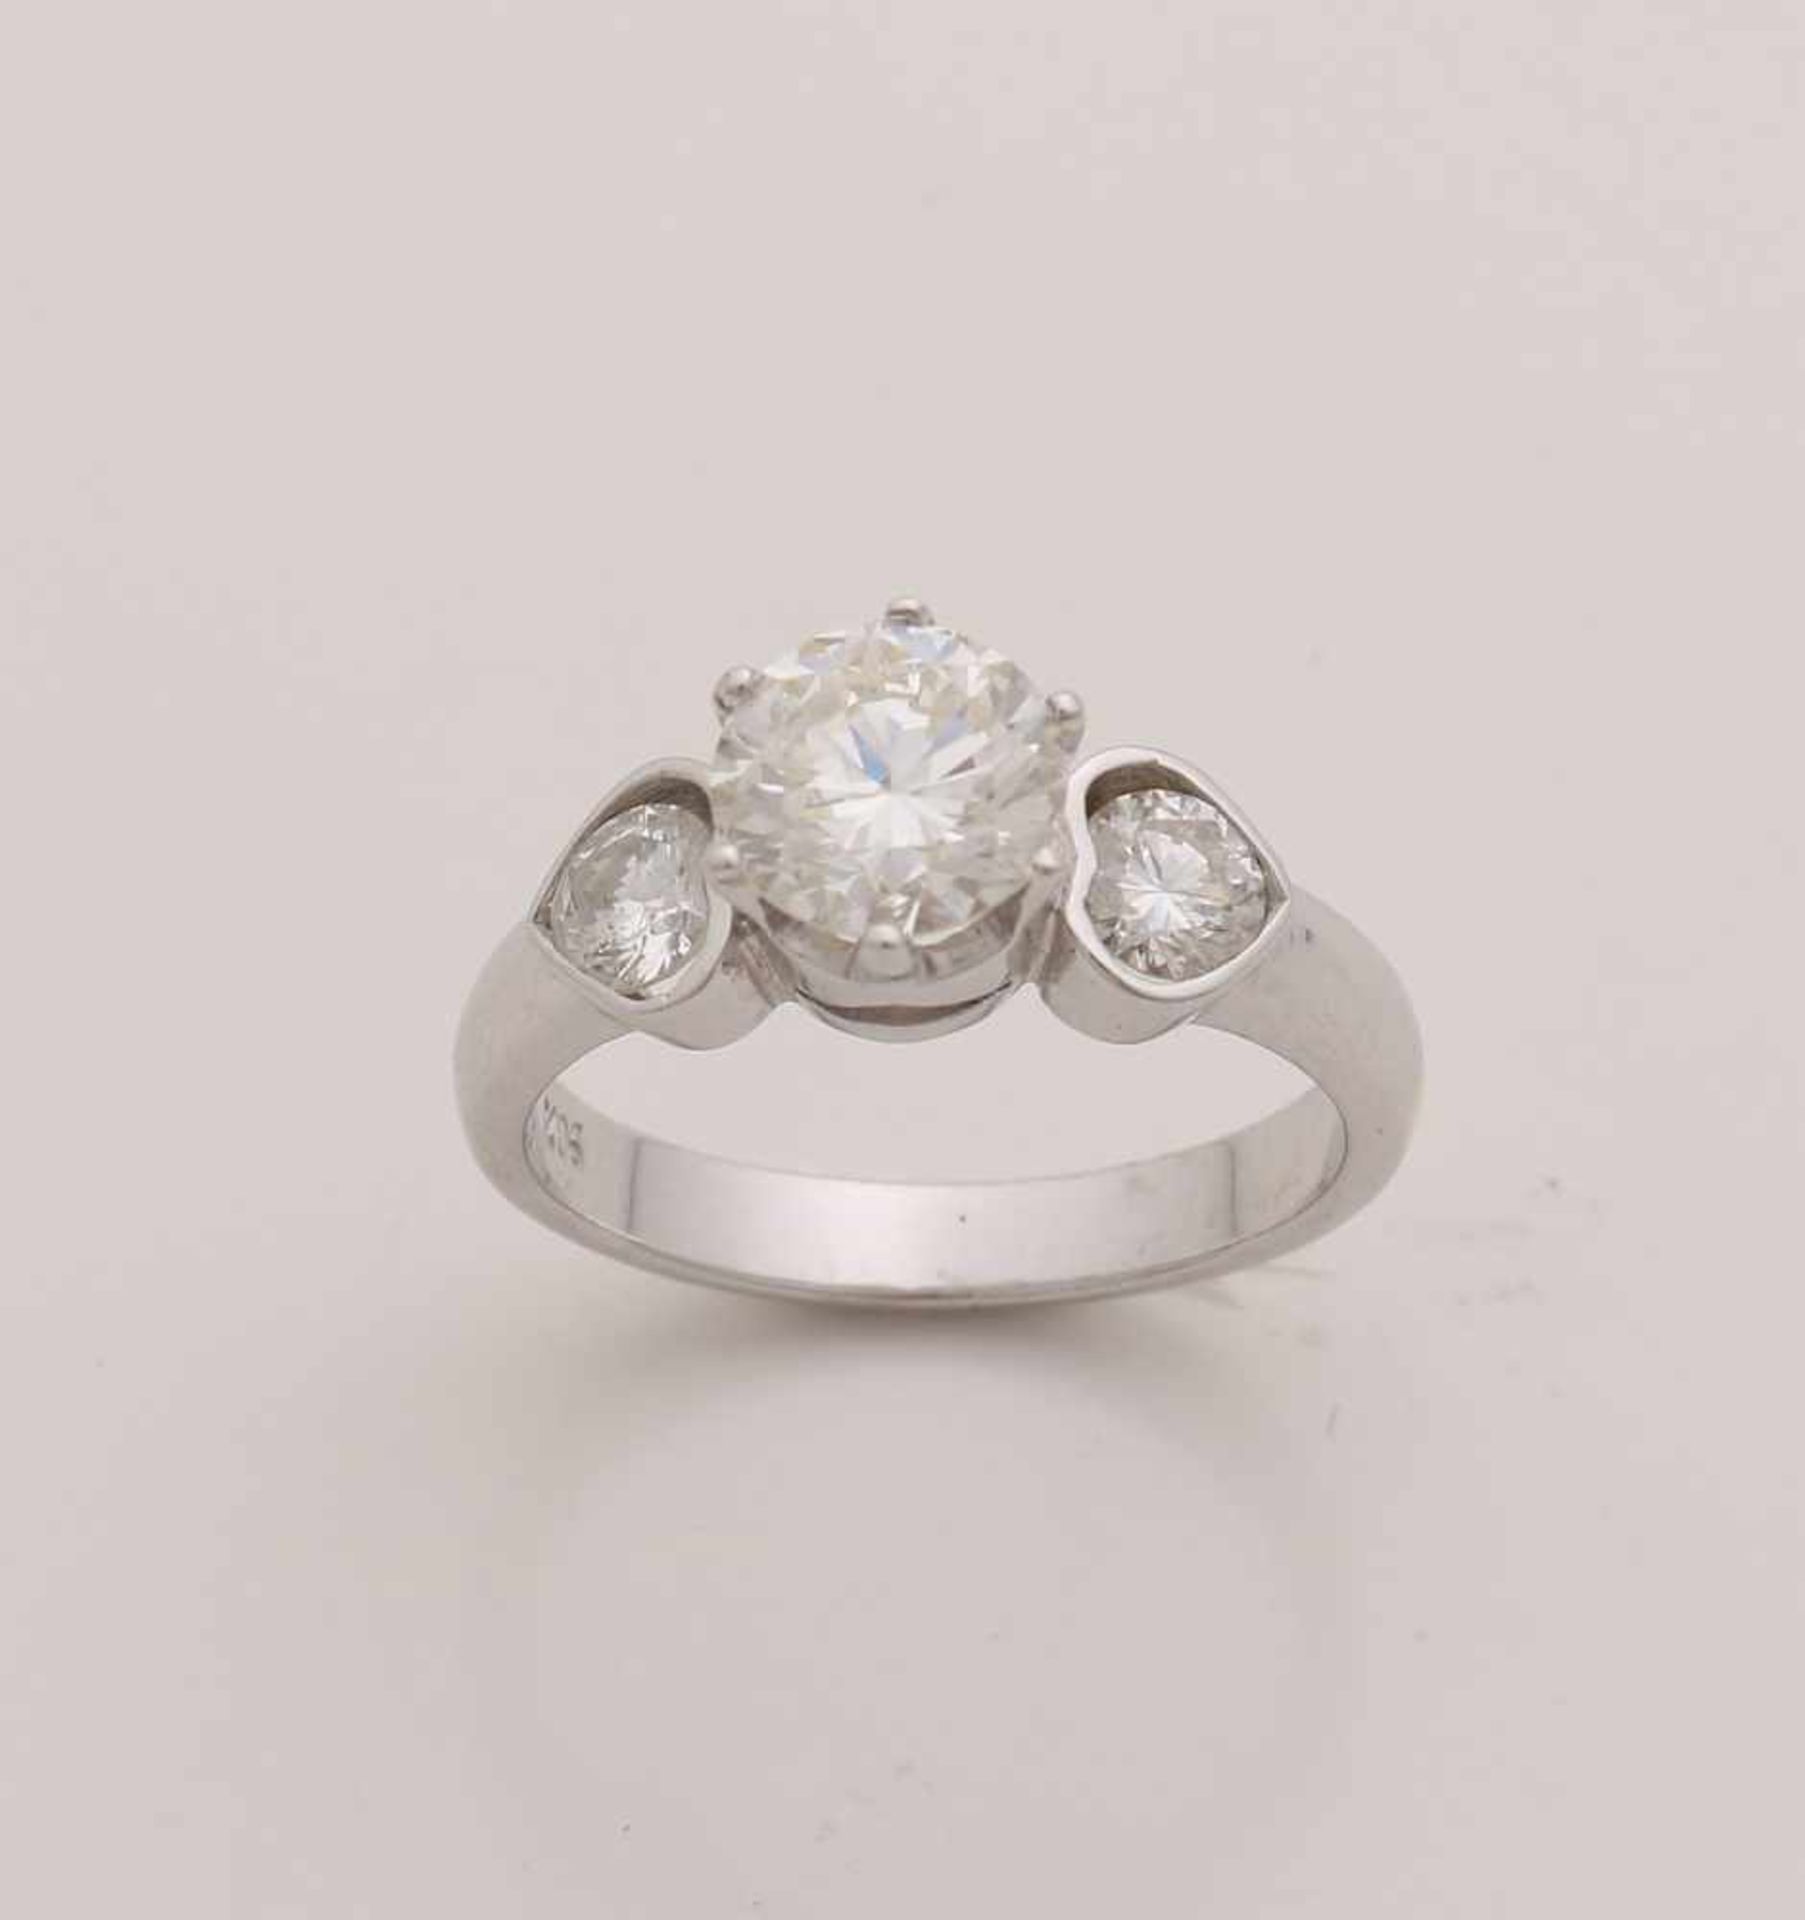 Beautiful white gold ring, 750/000, with 3 diamonds. Ring with a large brilliant cut diamond in